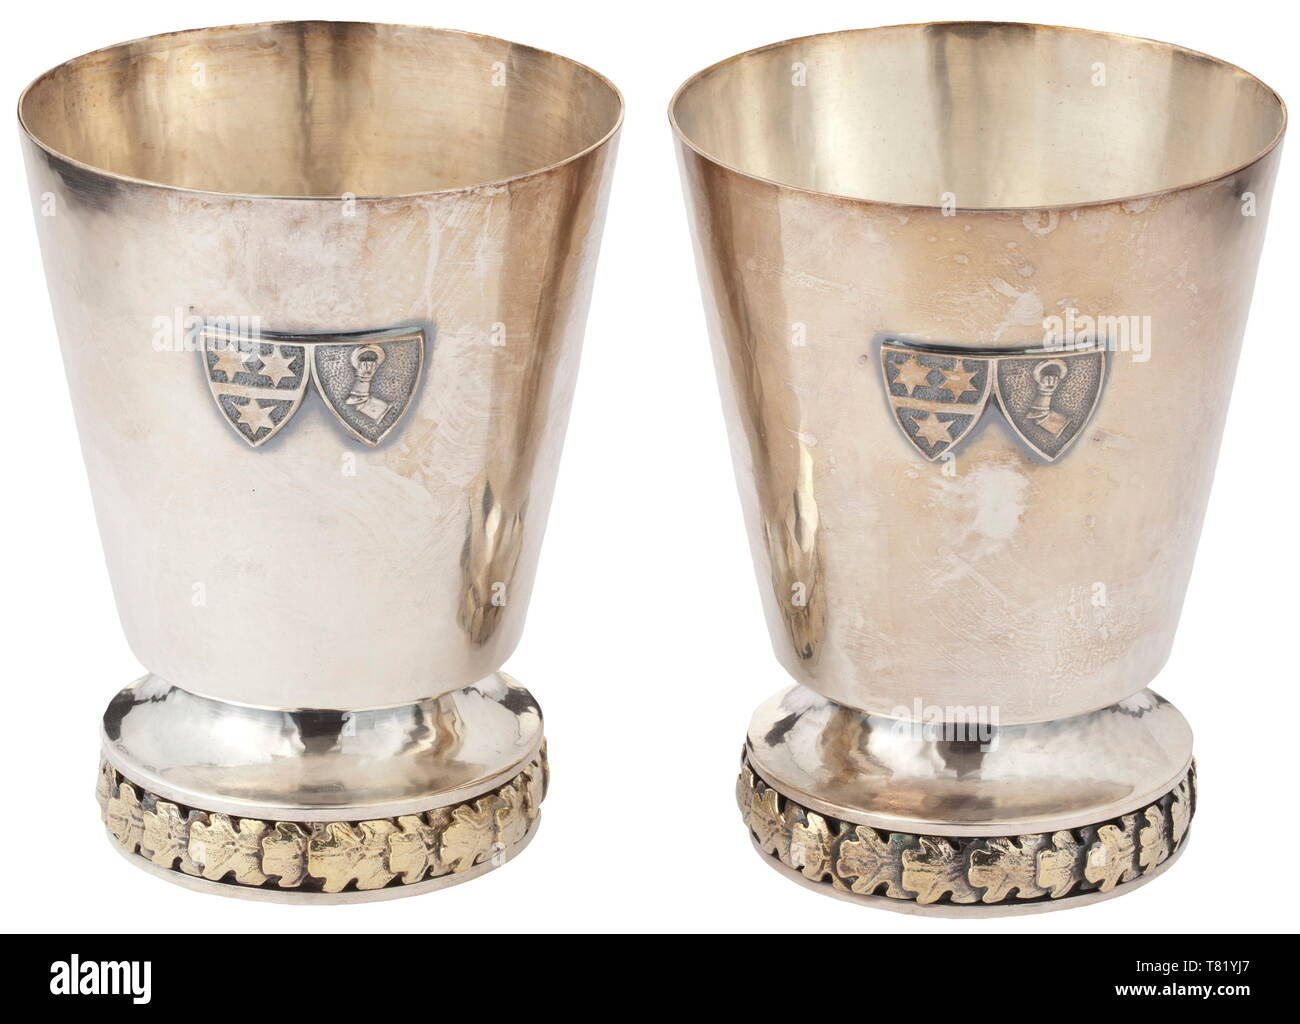 Hermann and Emmy Göring - two silver drinking beakers from their personal table service. Heavy wrought issue, the lower edges with a continuous frieze of oak leaves in relief, the viewing surfaces with an applied alliance coat of arms. The bottom with the master's mark of Prof. Herbert Zeitner, Berlin, Göring's preferred gold- and silversmith. Fineness 925. Height 11 cm. Weight 285 g and 305 g. Eminently beautiful, heavy silversmith work. Provenance: Keith Wilson Collection, Kansas City. historic, historical, 20th century, 1930s, NS, National Socialism, Nazism, Third Reich,, Editorial-Use-Only Stock Photo